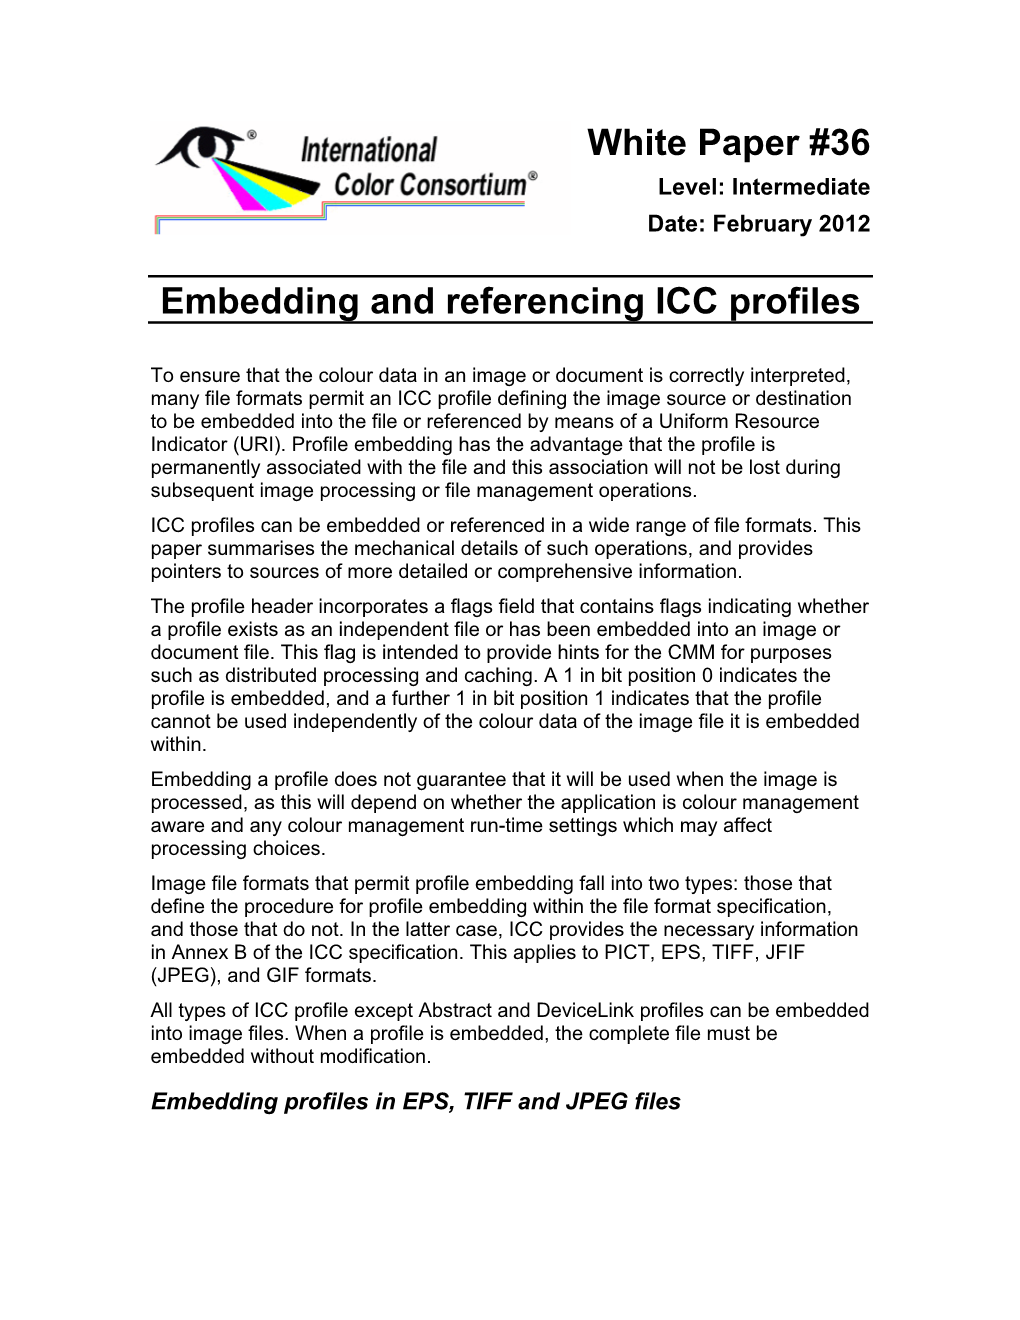 White Paper #36 Embedding and Referencing ICC Profiles